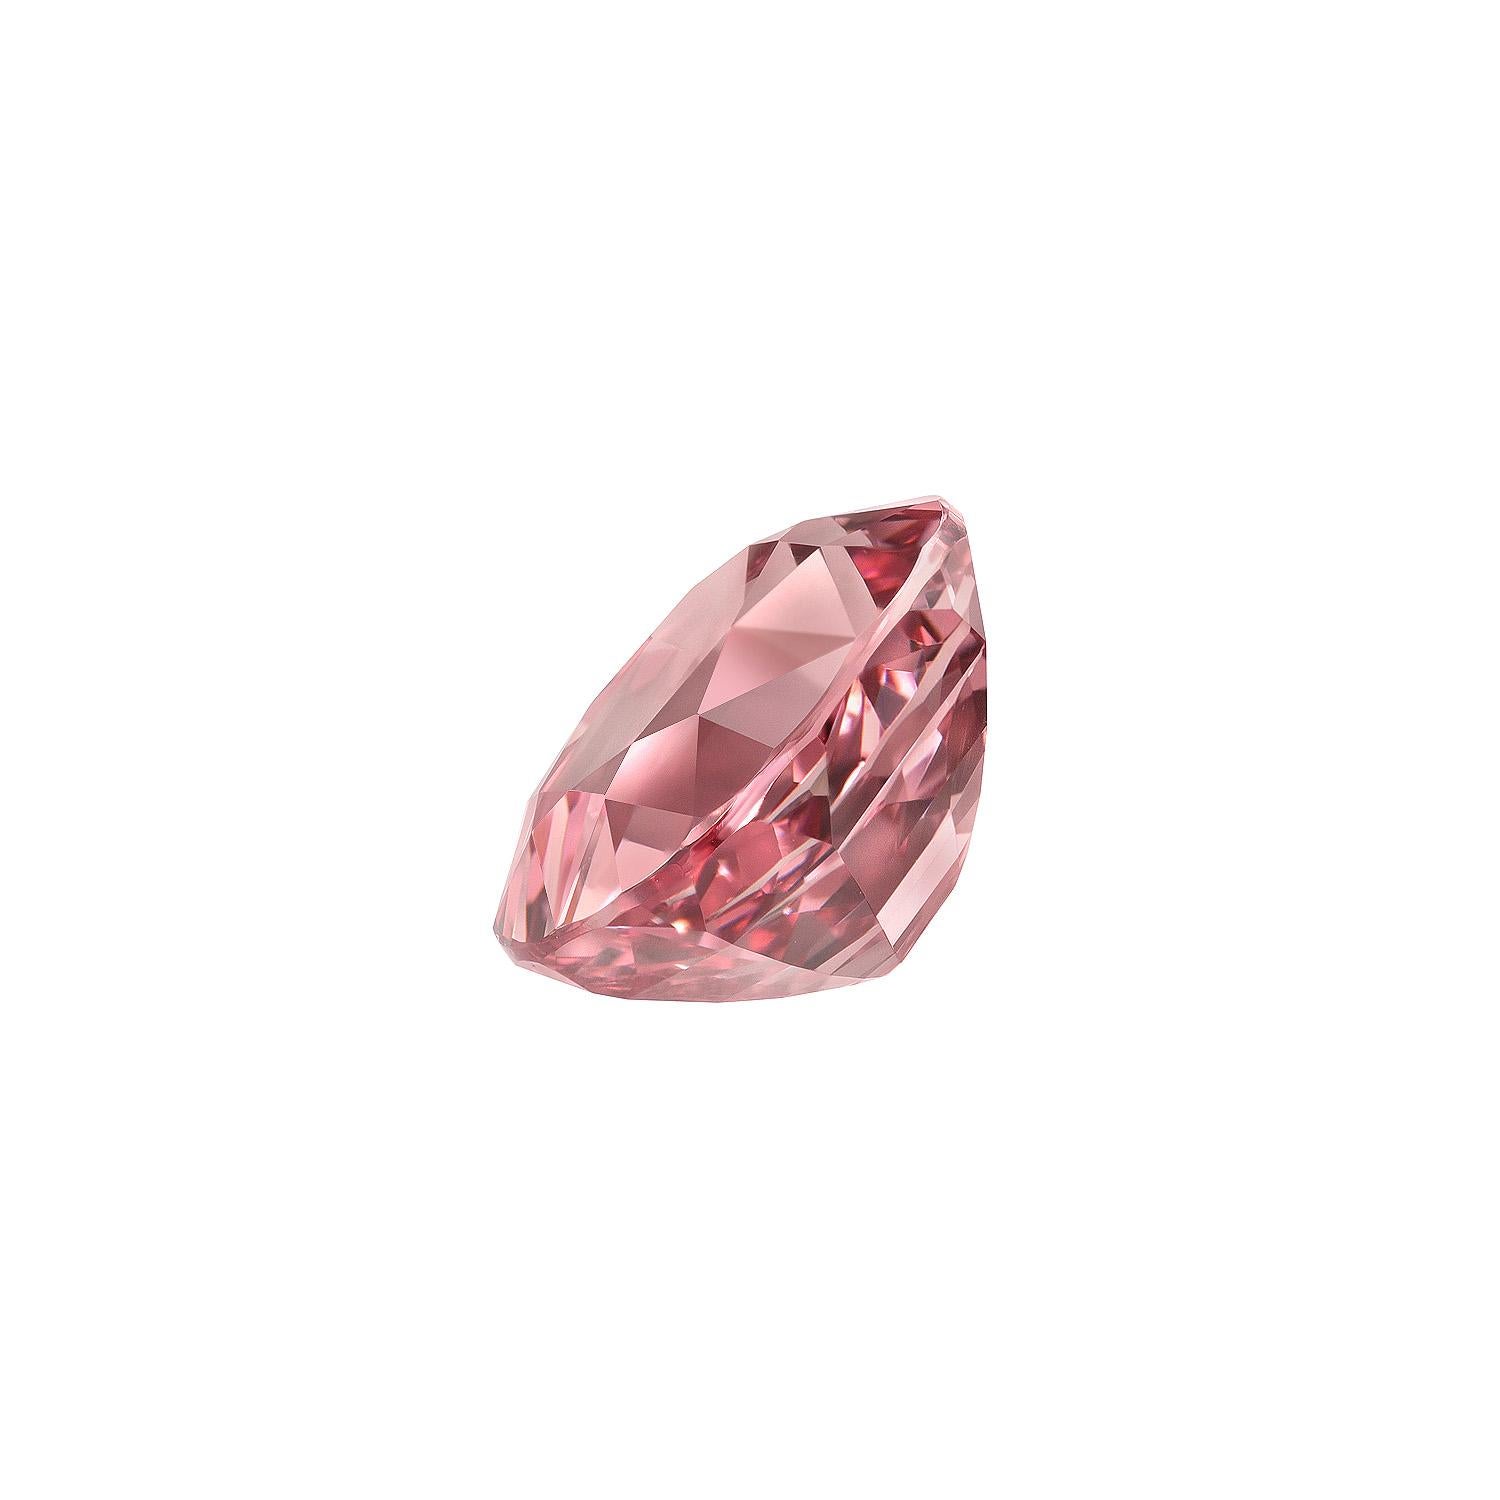 Special 6.69 carat pink Malaya Garnet oval gem, offered loose to a fine gemstone lover.
Returns are accepted and paid by us within 7 days of delivery.
We offer supreme custom jewelry work upon request. Please contact us for more details.
For your